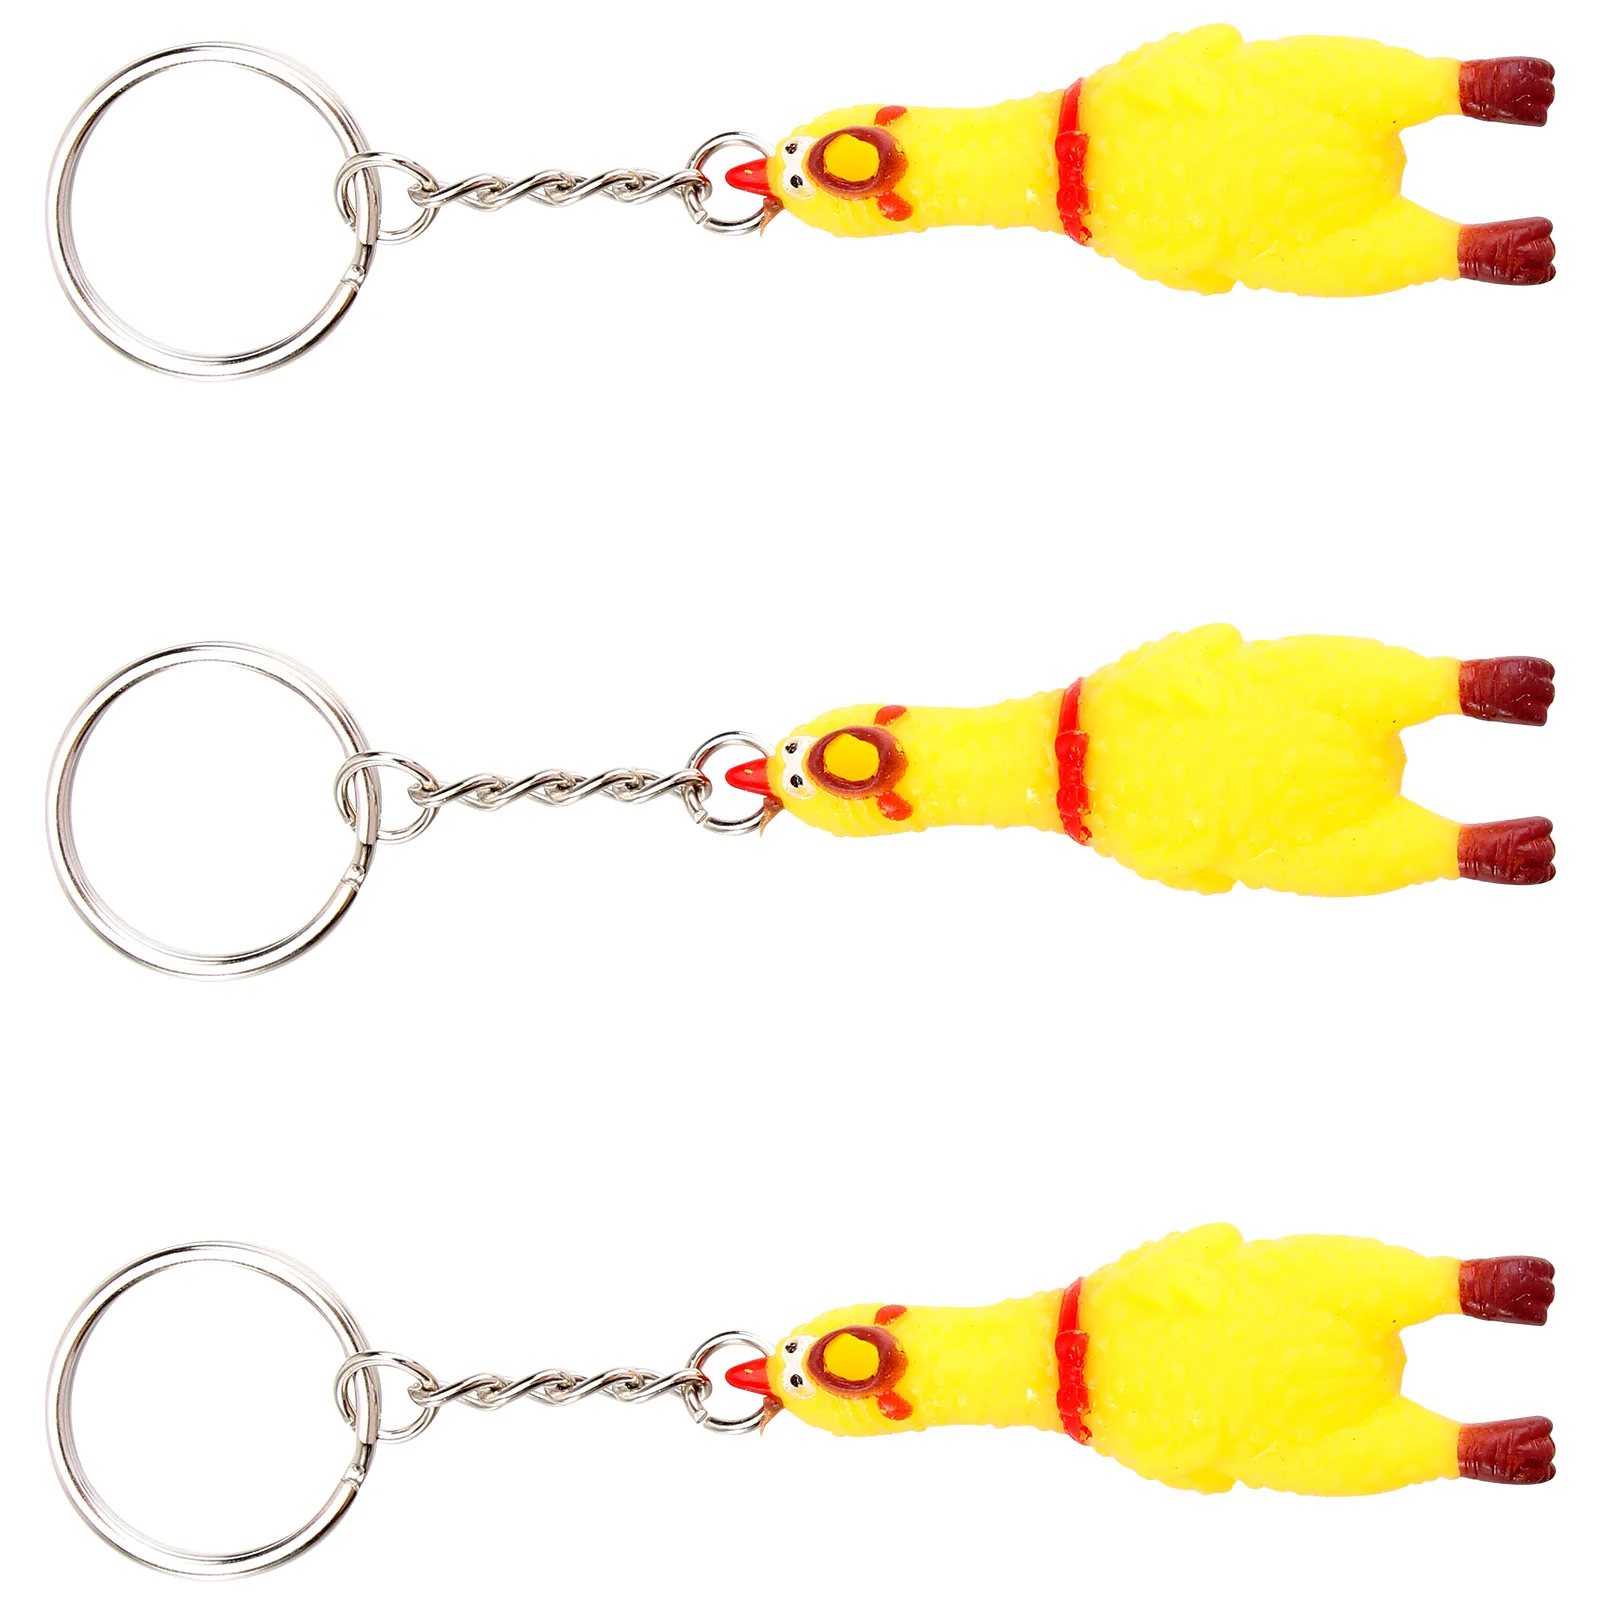 

Chicken Keychain Rubber Screaming Toy Key Squeeze Pendant Keychains Funny Squeaking Mini Charm Squeaky Chains Dog Chain Lanyard